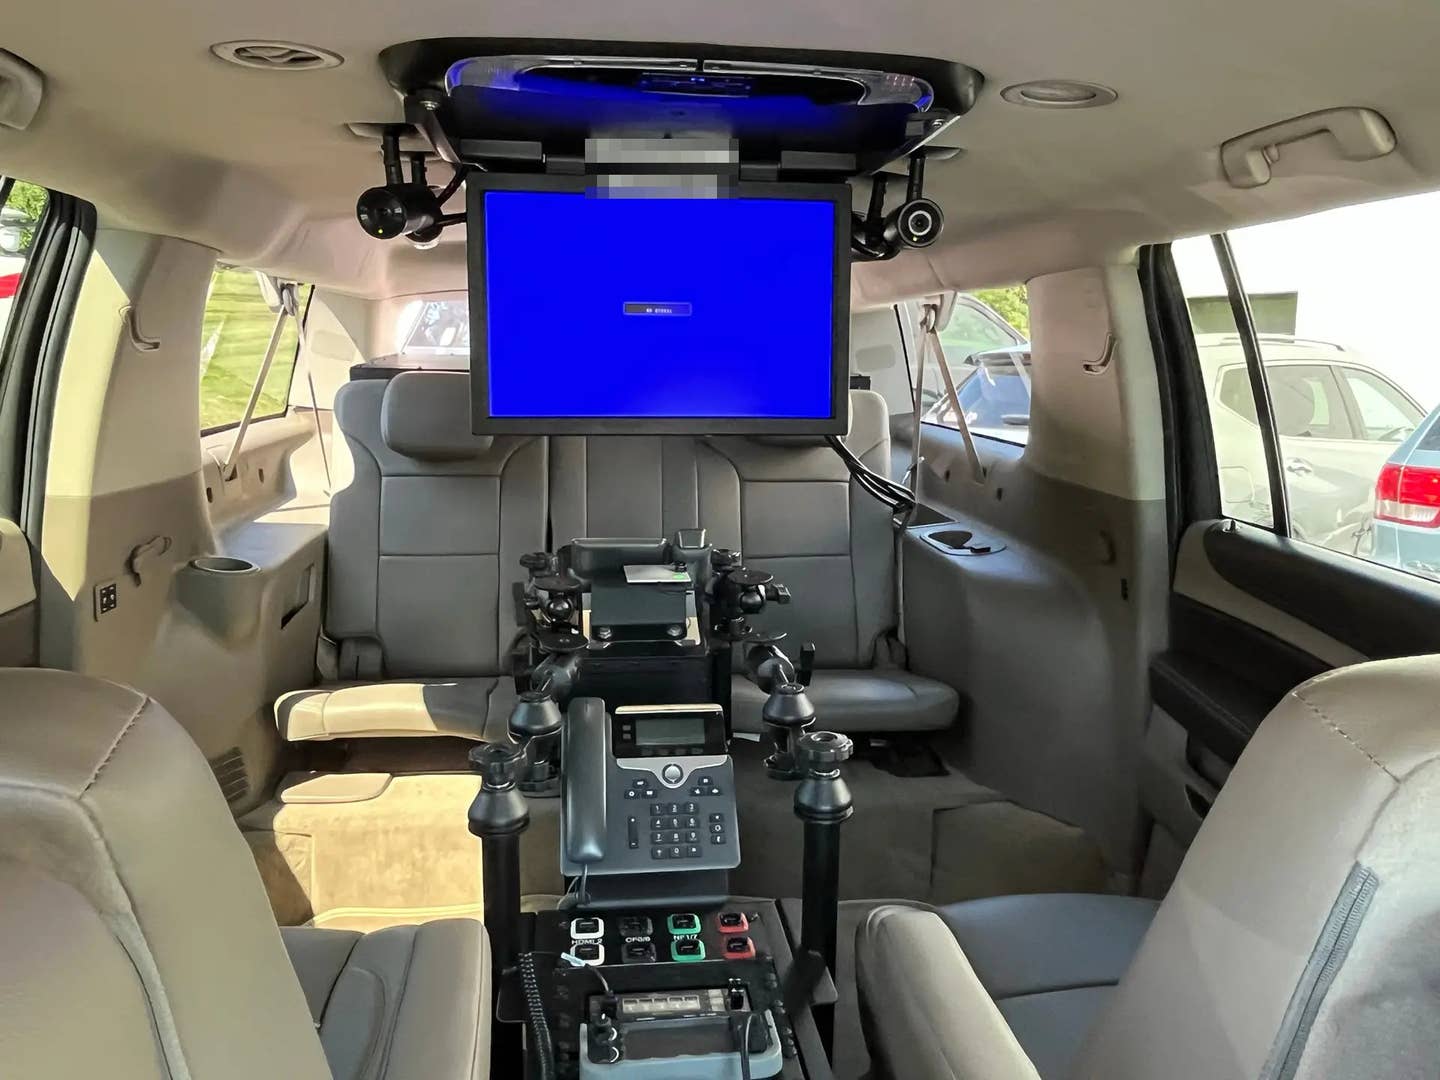 A view of the main passenger cabin inside the stretched Suburban command vehicle. What appears to be an equipment box at the very rear is also just visible over the back of the rear seats. <em>Accelerated Media Technologies</em>